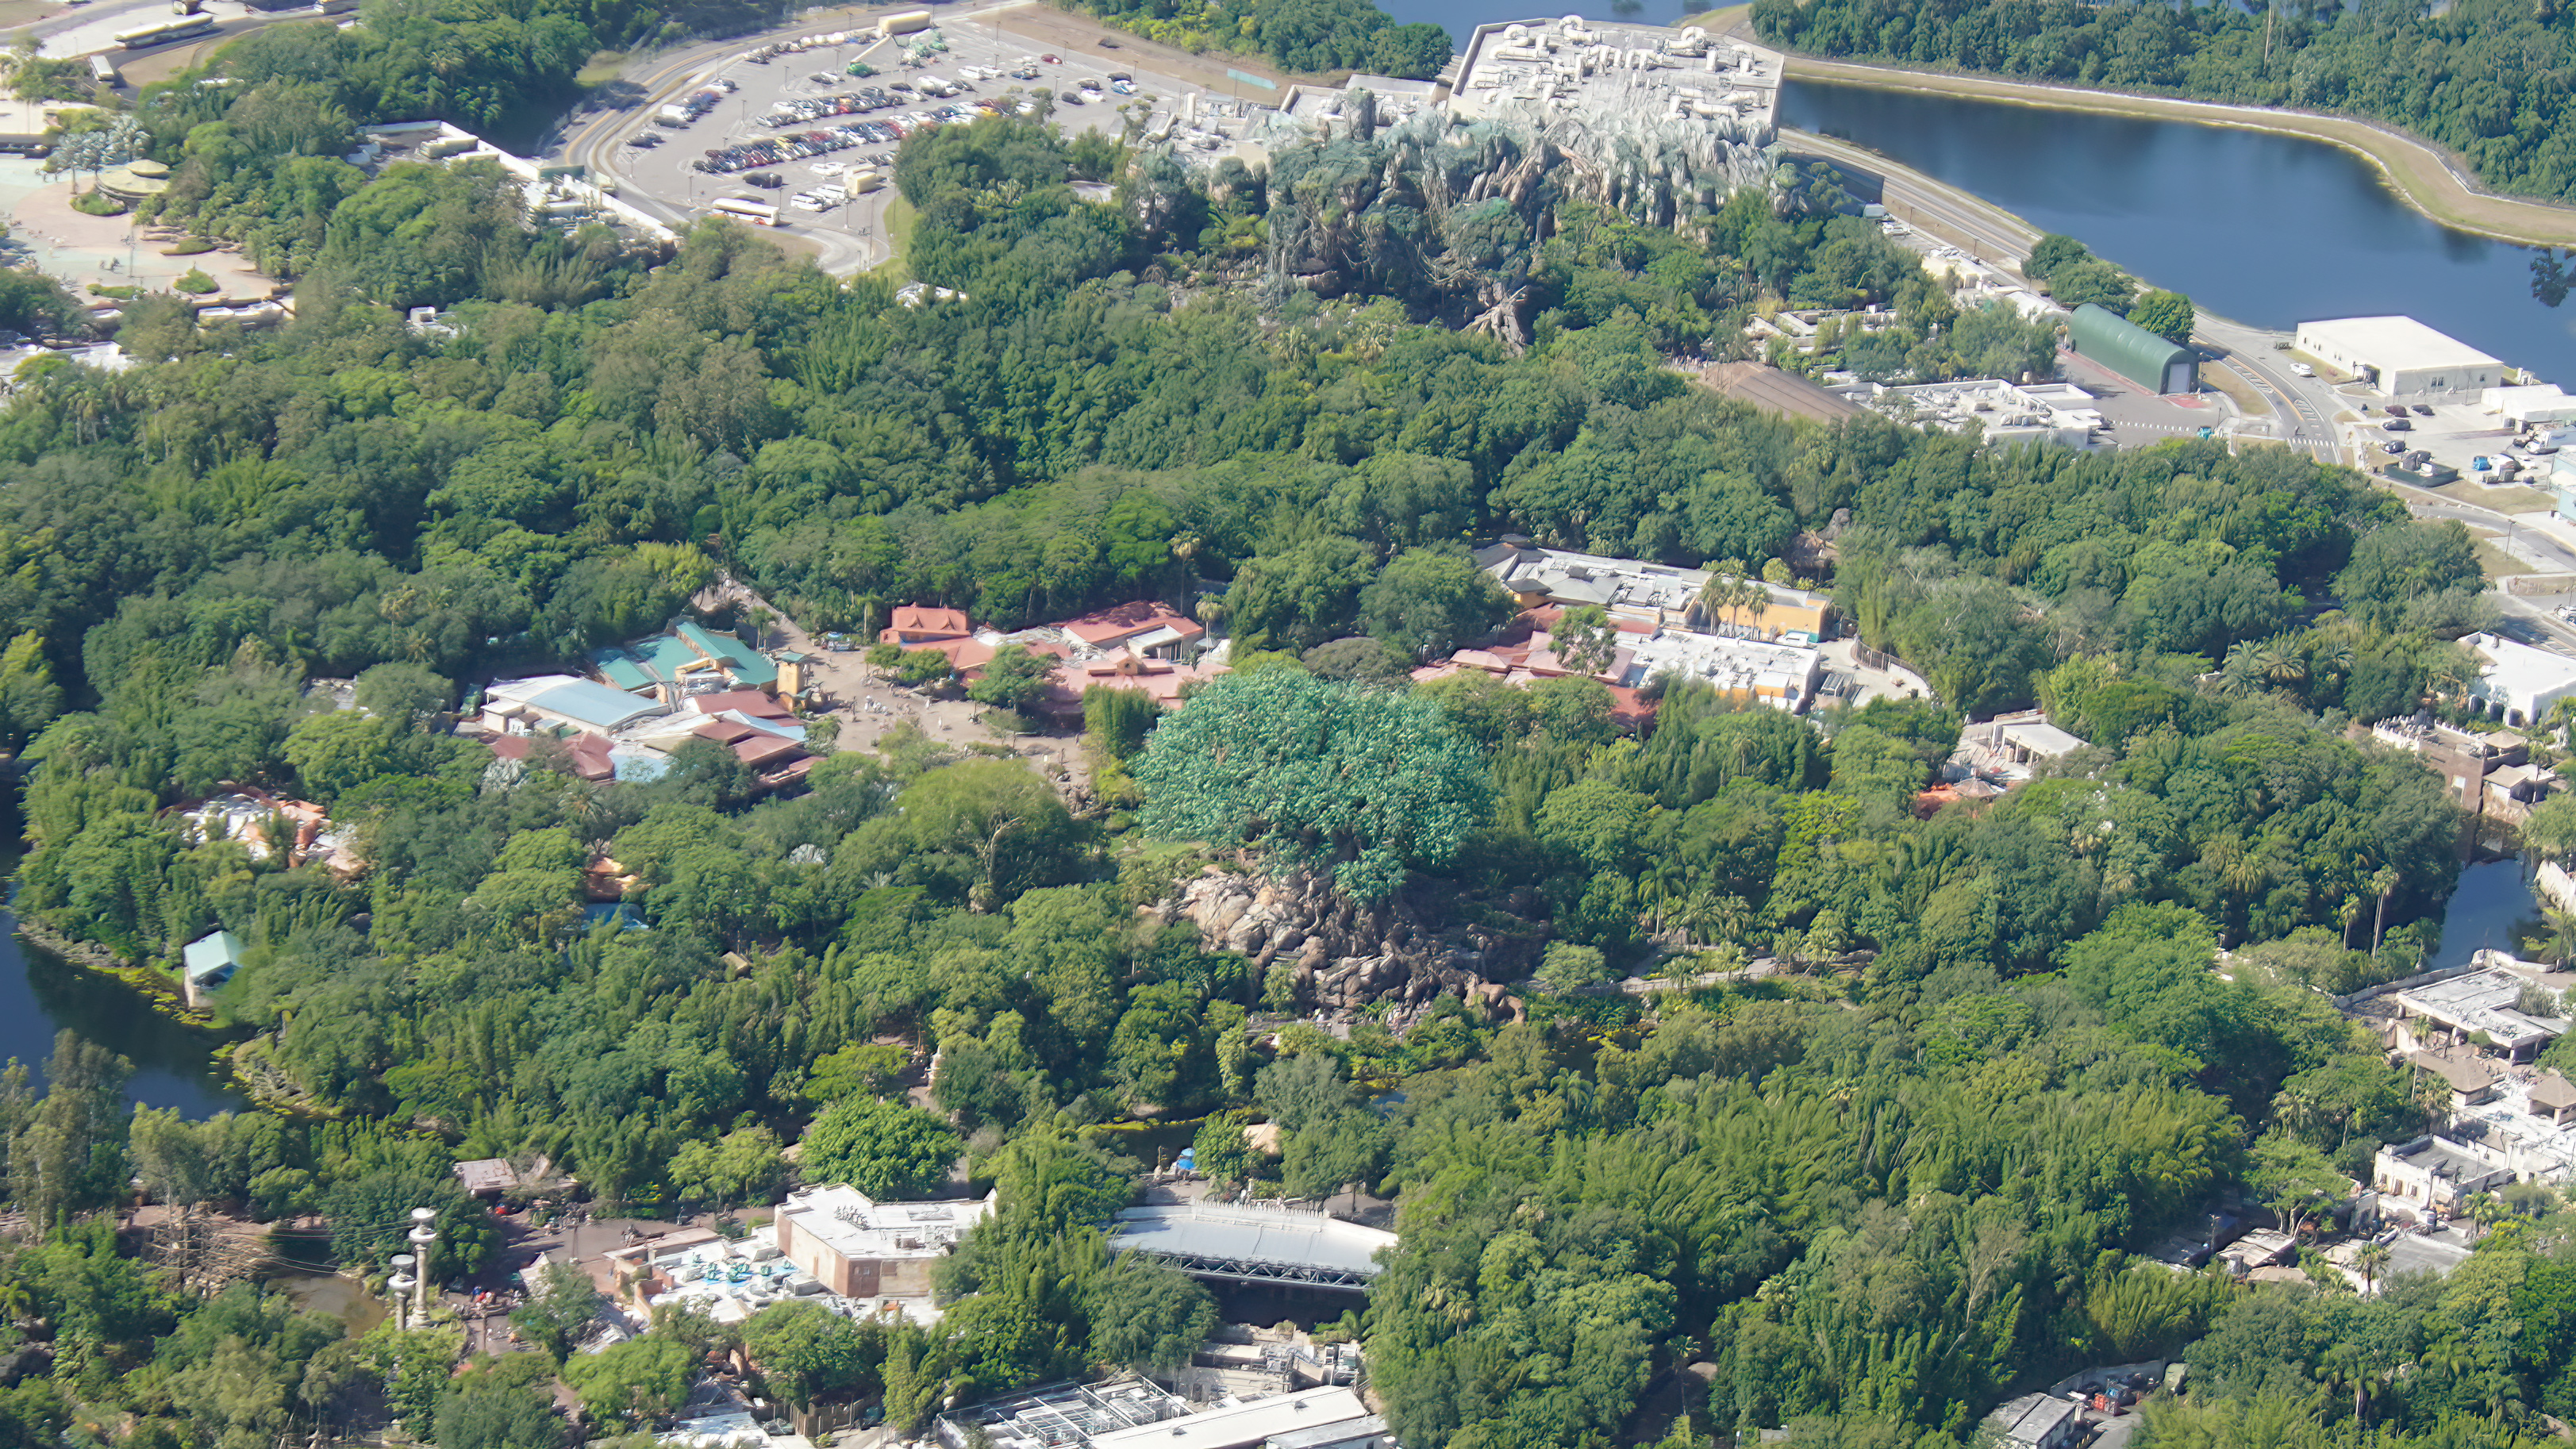 bioreconstruct on Twitter: "Aerial view of Discovery Island and Tree of  Life in Disney's Animal Kingdom. https://t.co/92PWS7bGud" / Twitter